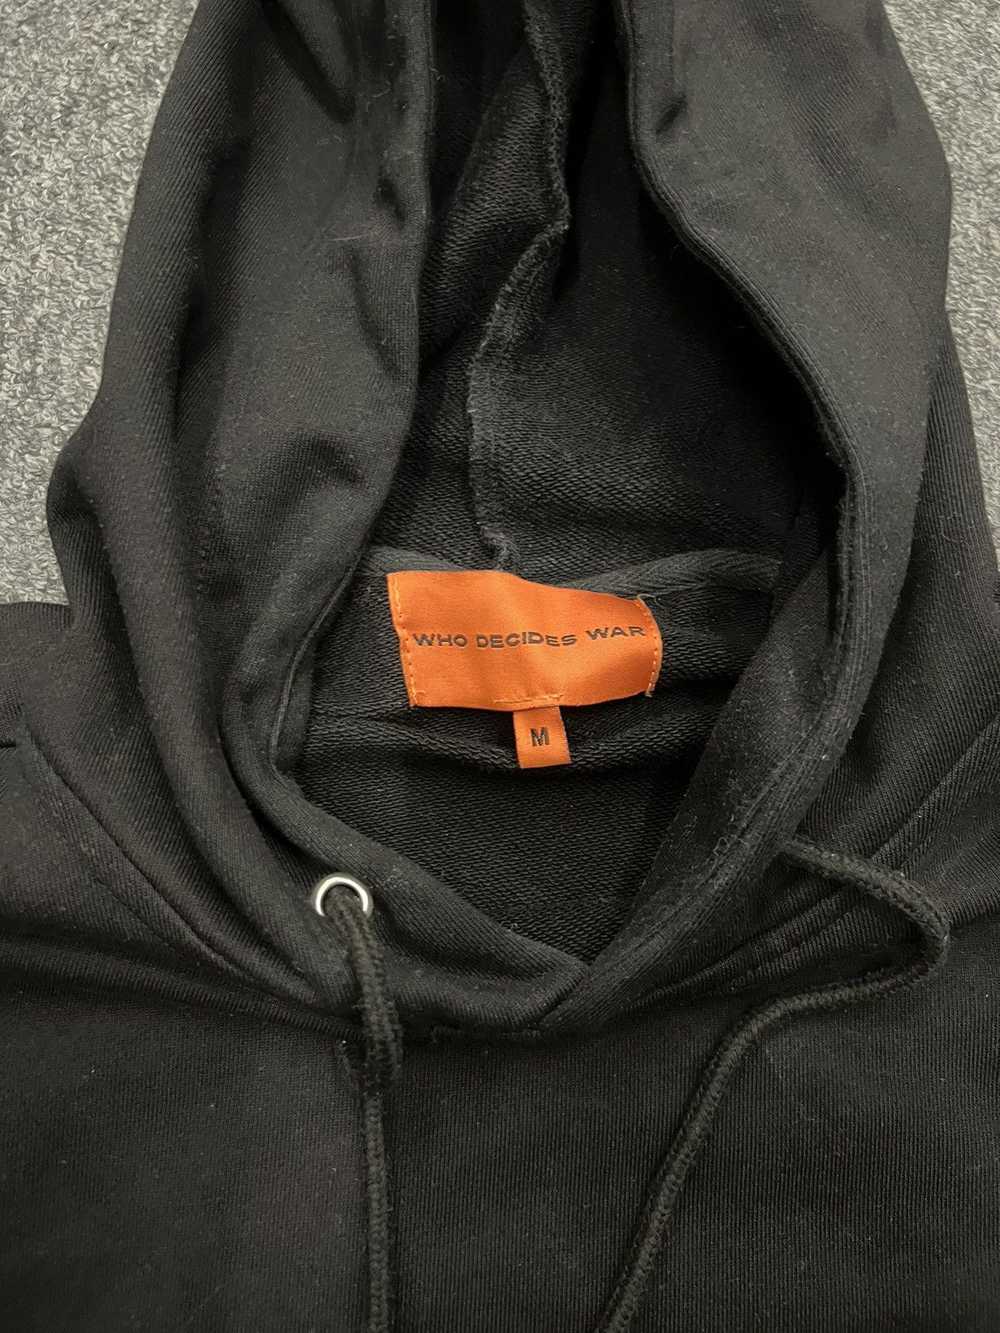 Who Decides War Signature Blank hoodie - image 3